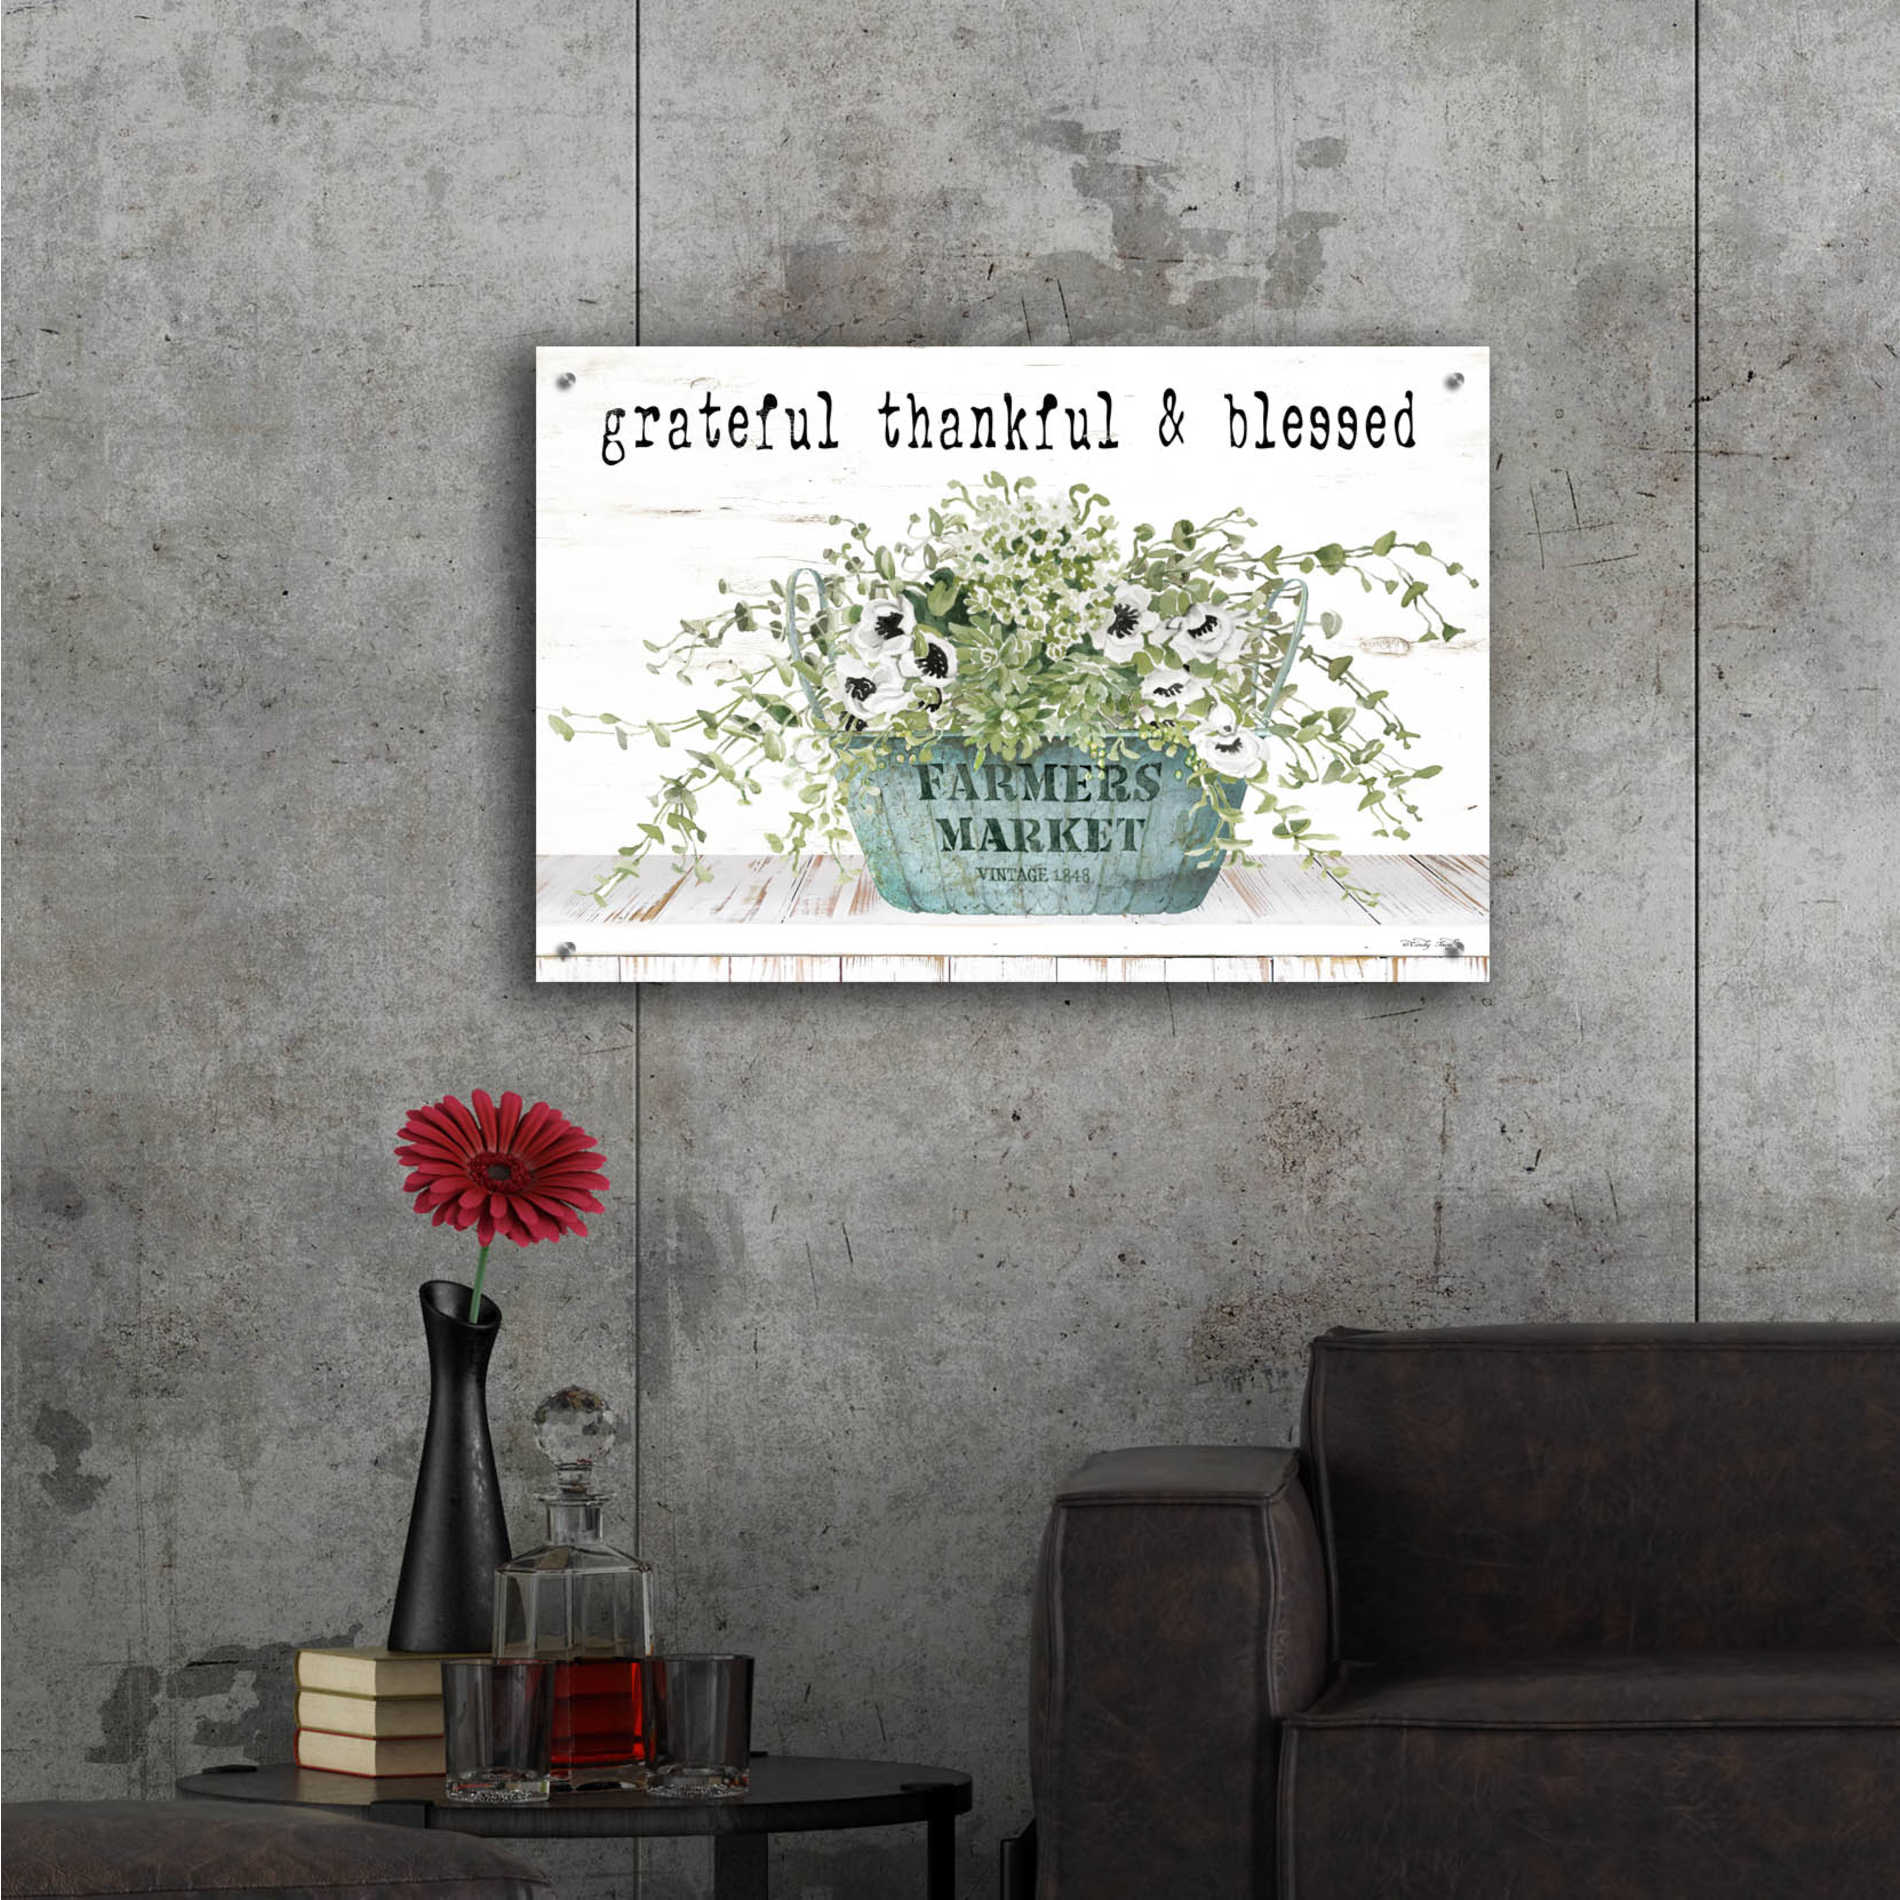 Epic Art 'Grateful Thankful & Blessed' by Cindy Jacobs, Acrylic Glass Wall Art,36x24